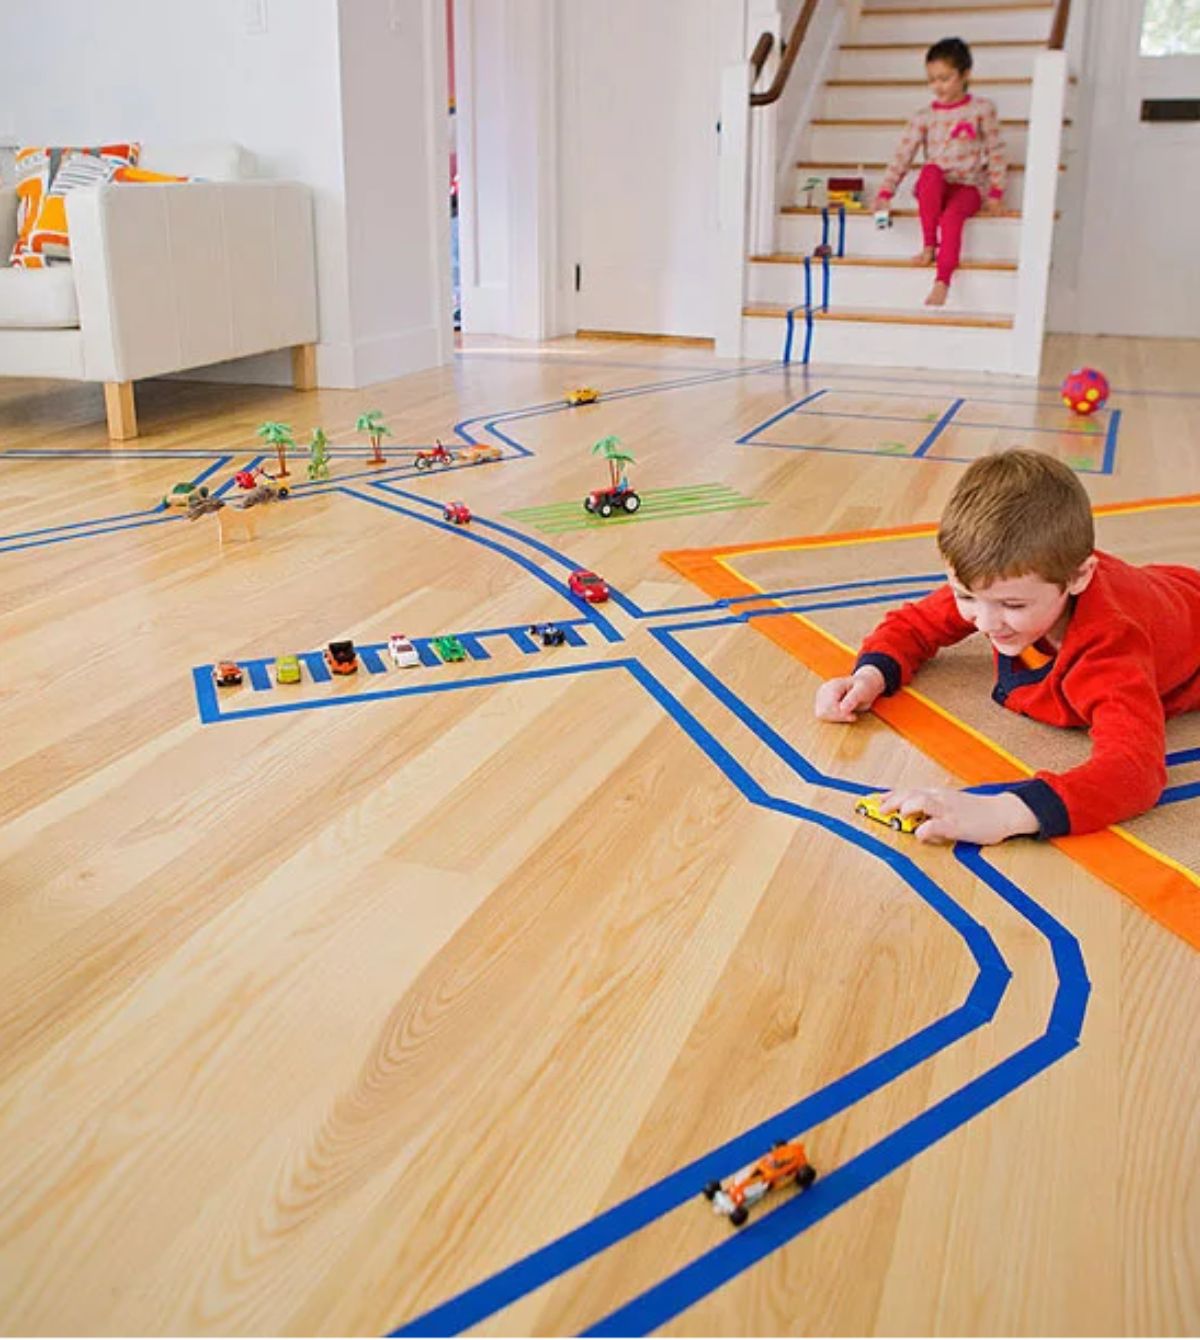 a pale laminate floor is covered in tracks made from colored tape. 2 children are pushing cars along the tracks